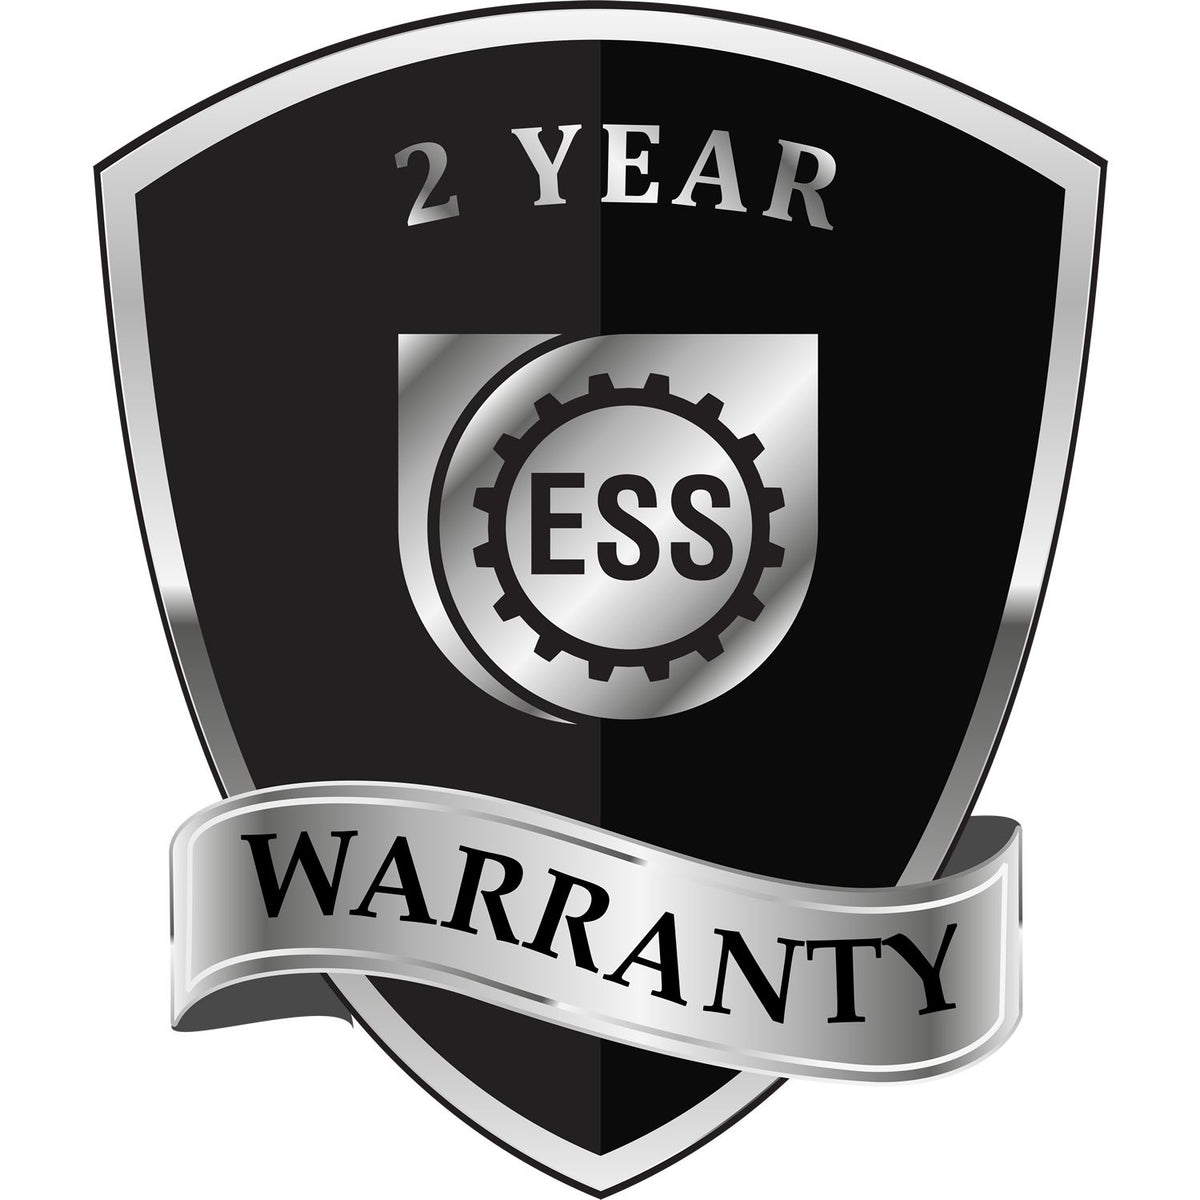 A black and silver badge or emblem showing warranty information for the Soft Arkansas Professional Geologist Seal